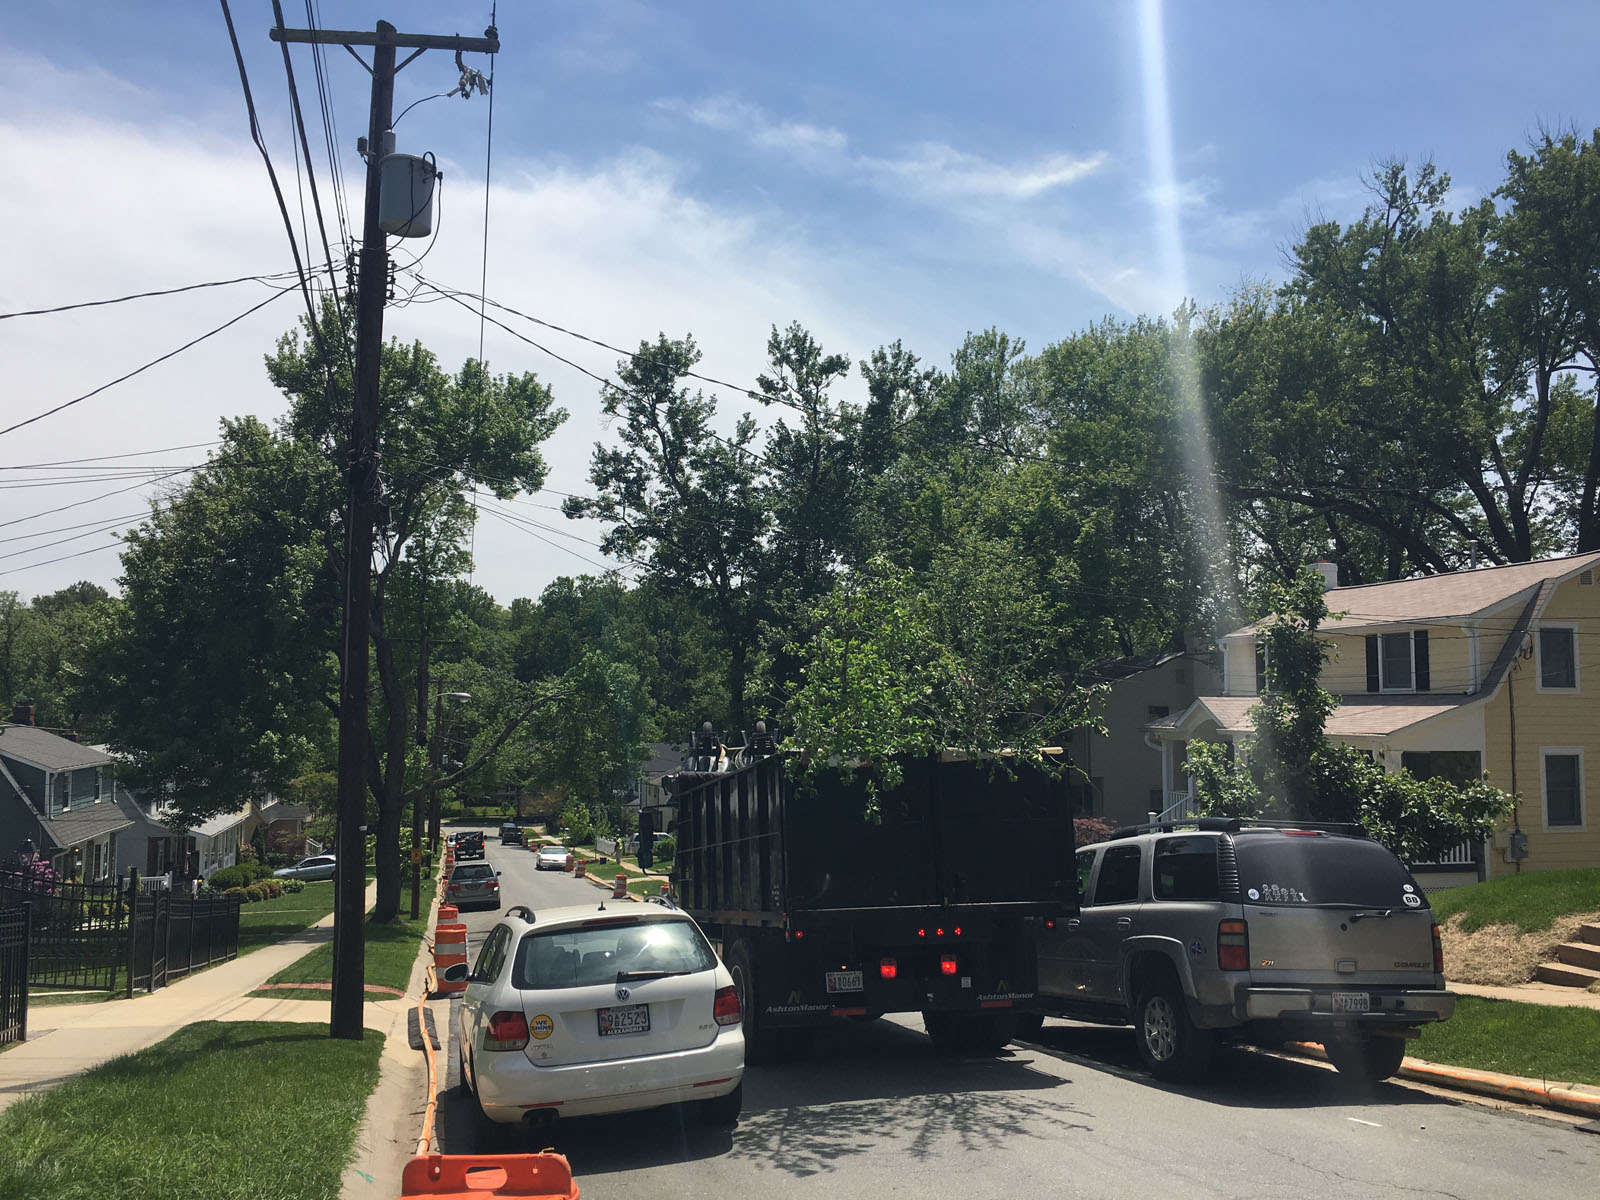 North Bethesda neighborhood is getting an apology from Washington Suburban Sanitary Commission. The area utility company says it failed to adequately warn residents about a plan to remove several mature trees along their street. (WTOP/Mike Murillo)